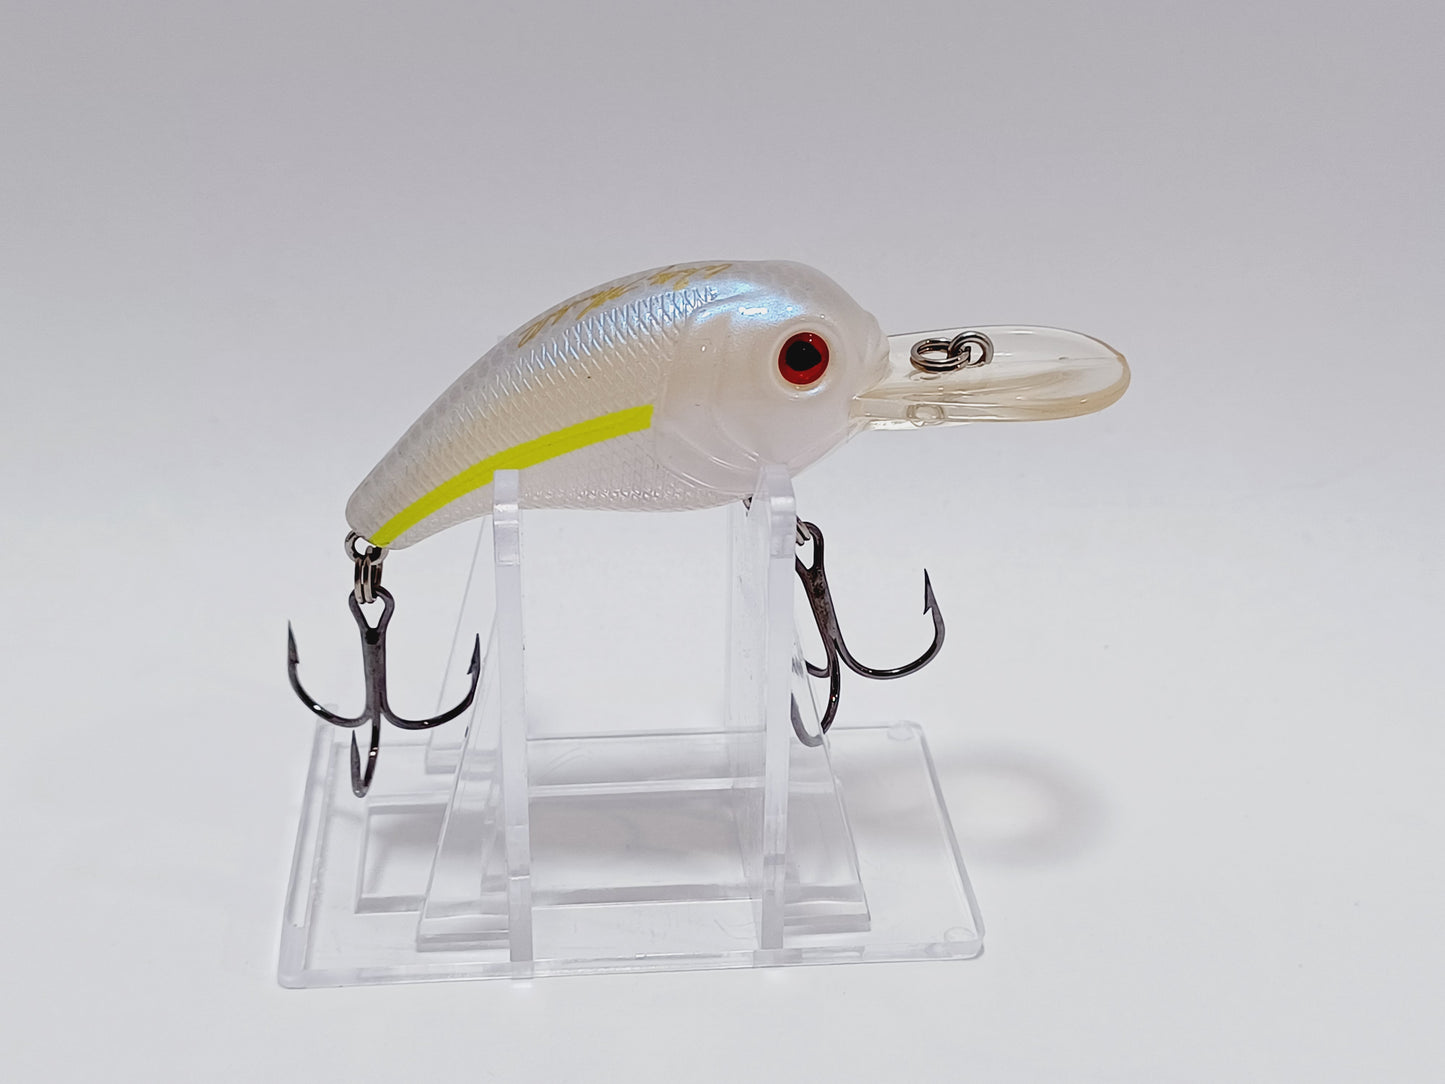 Classic Bass Pro Shop Crappie Maxx Cranks diving lure (Pearl white -chartreuse)